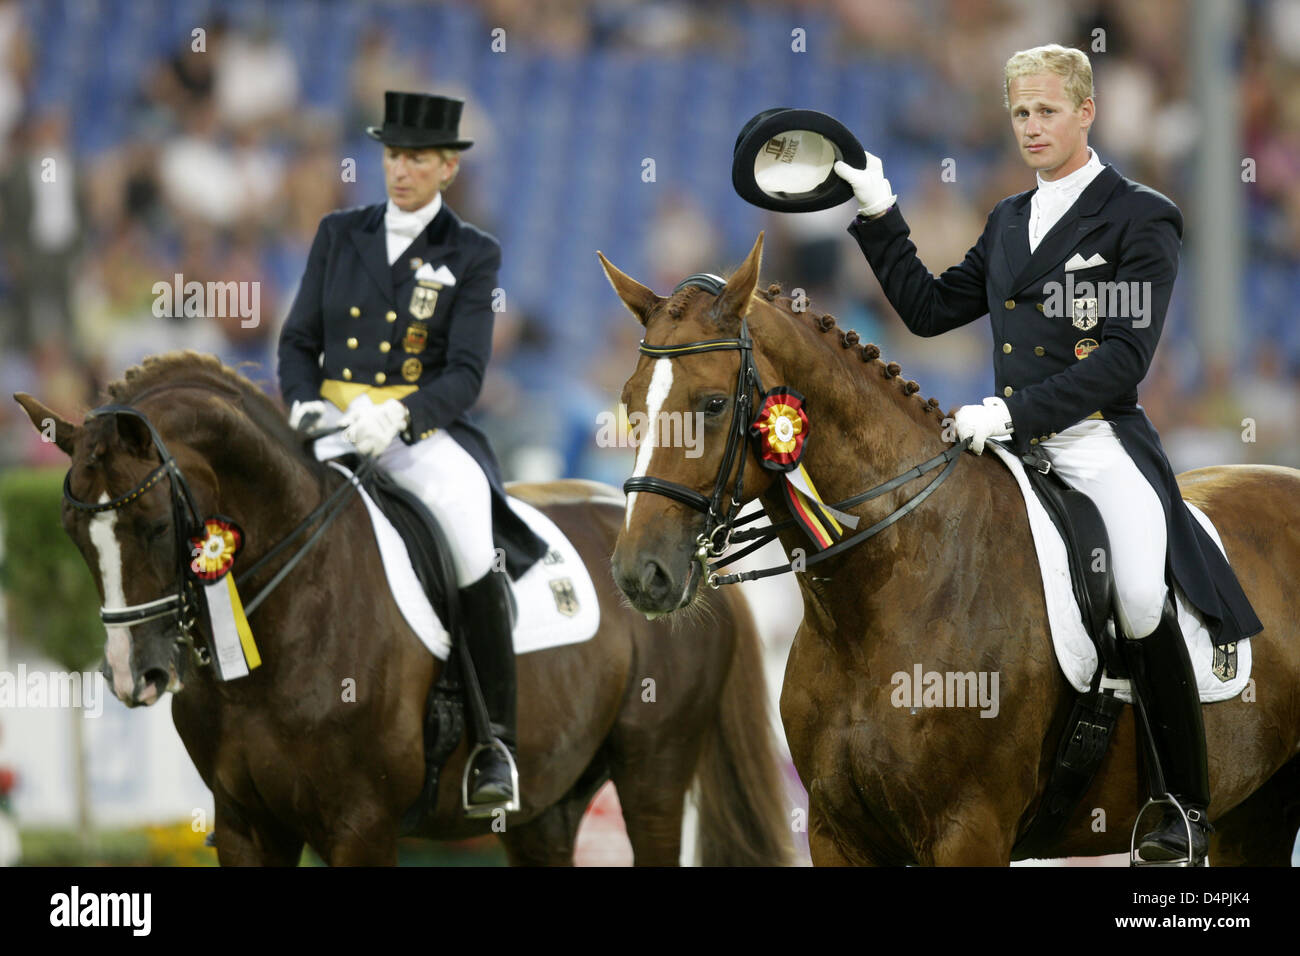 German dressage riders Matthias Alexander Rath and Heike Kemmer sit on their horses at the World Equestrian Festival CHIO Aachen, Germany, 02 July 2009. The German team only won the silver medal in the Nations Cup of the world?s largest riding competition; the Dutch team finished on the first place. Photo: Rolf Vennenbernd Stock Photo